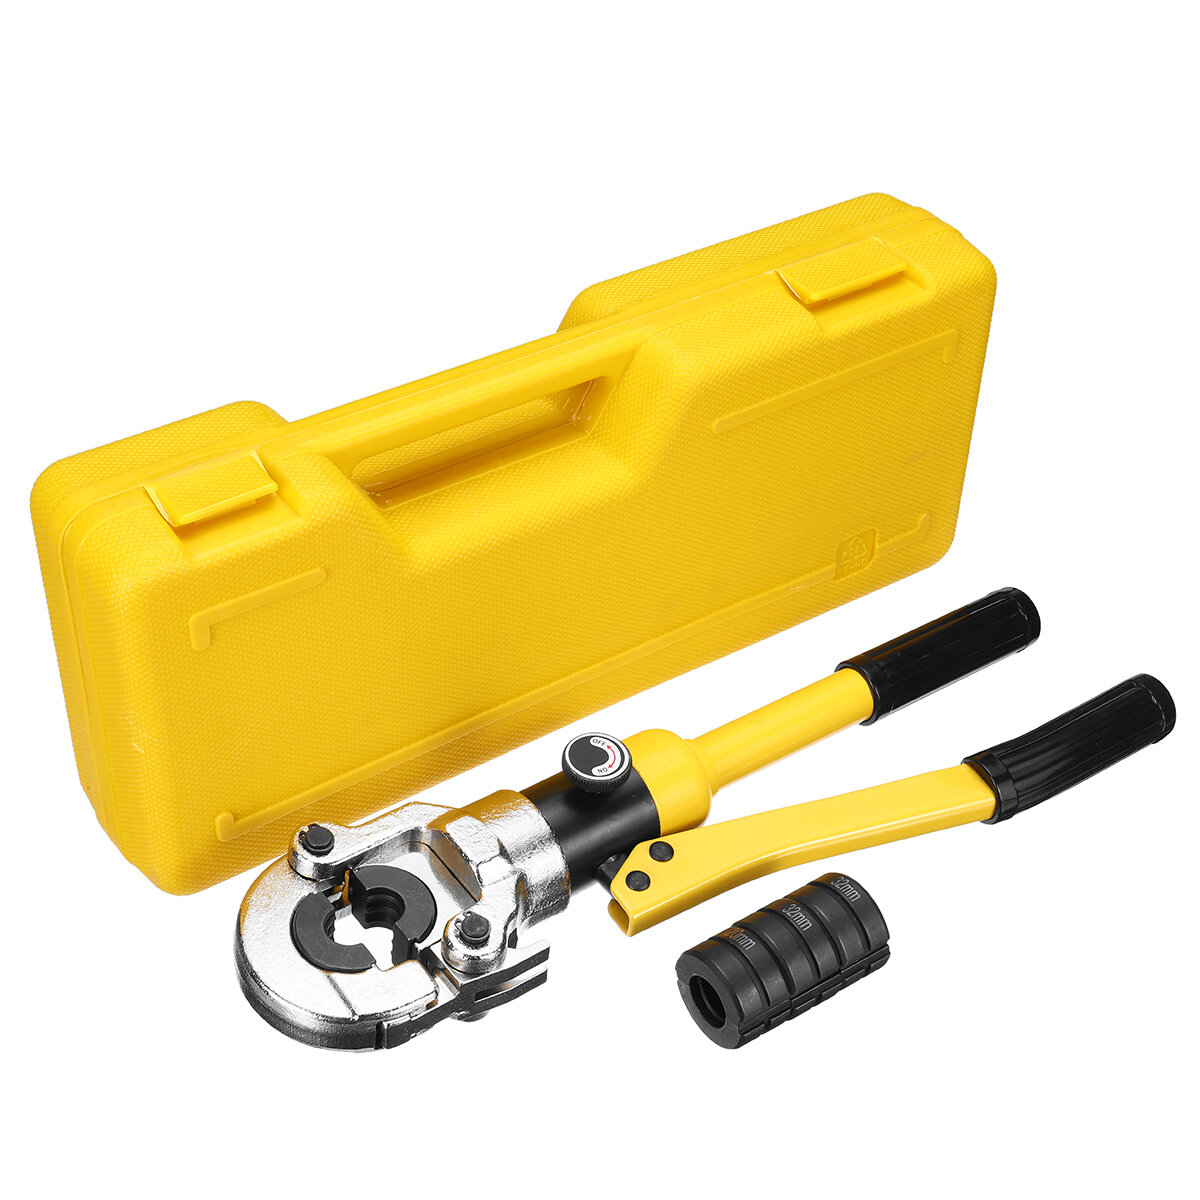 Image of 16-32mm Pressure Pipe Wrench Plumbing Pipe Press Clamp Tool 10T Crimping Force Stainless Steel Hand Tools